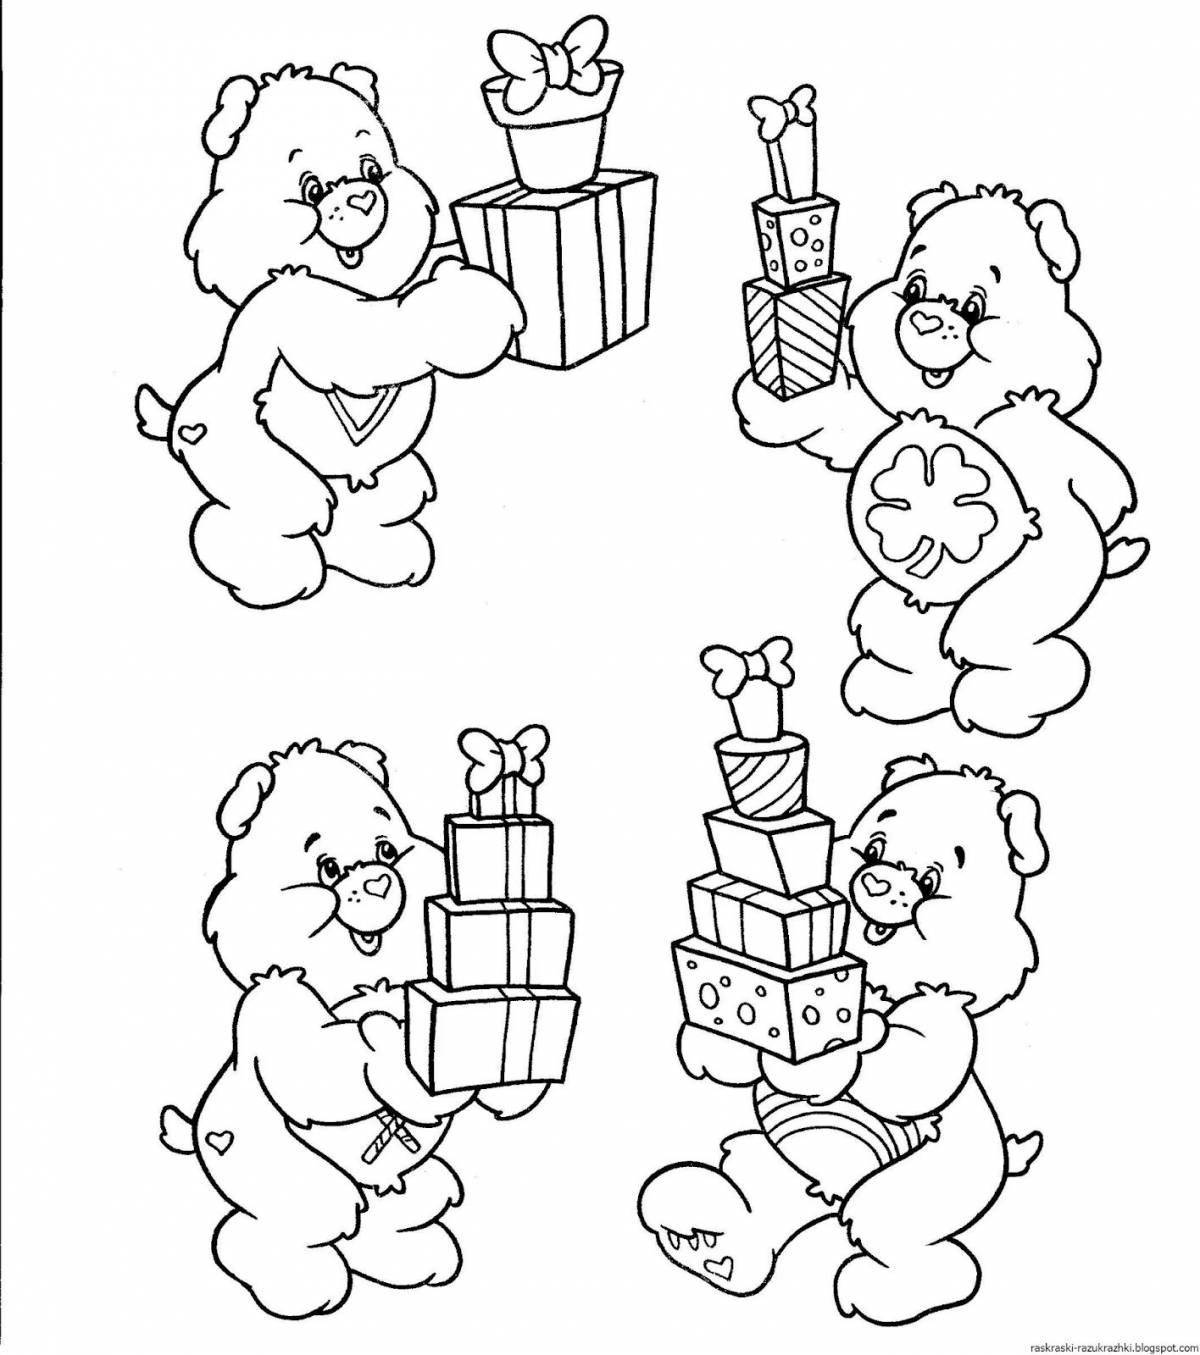 Nice coloring book for kids